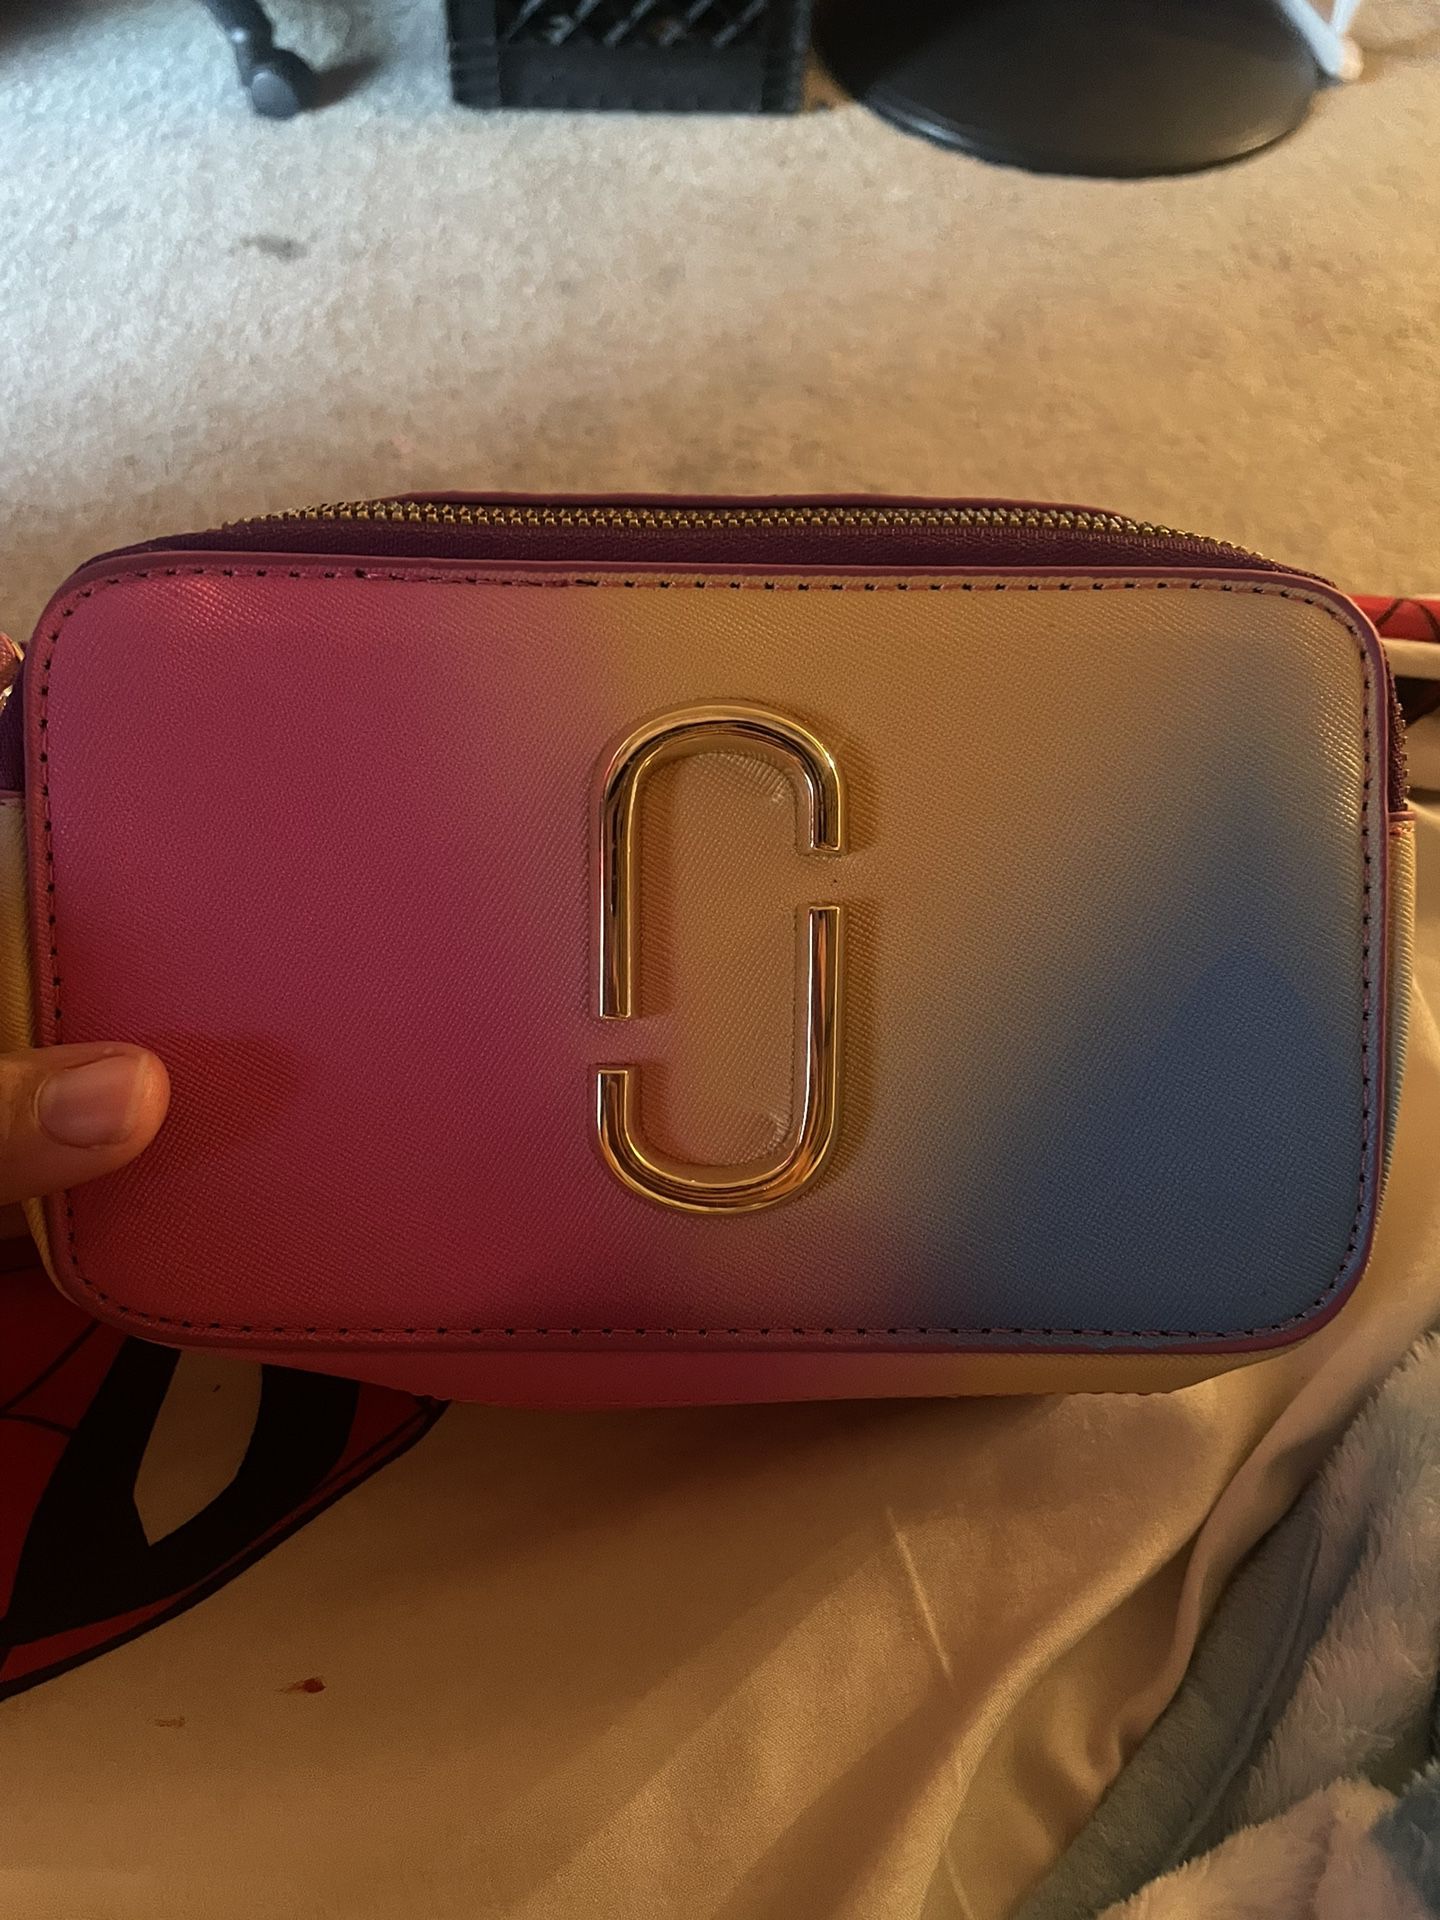 Rainbow Mini Bag New Marc Jacobs Sealed for Sale in Houston, TX - OfferUp